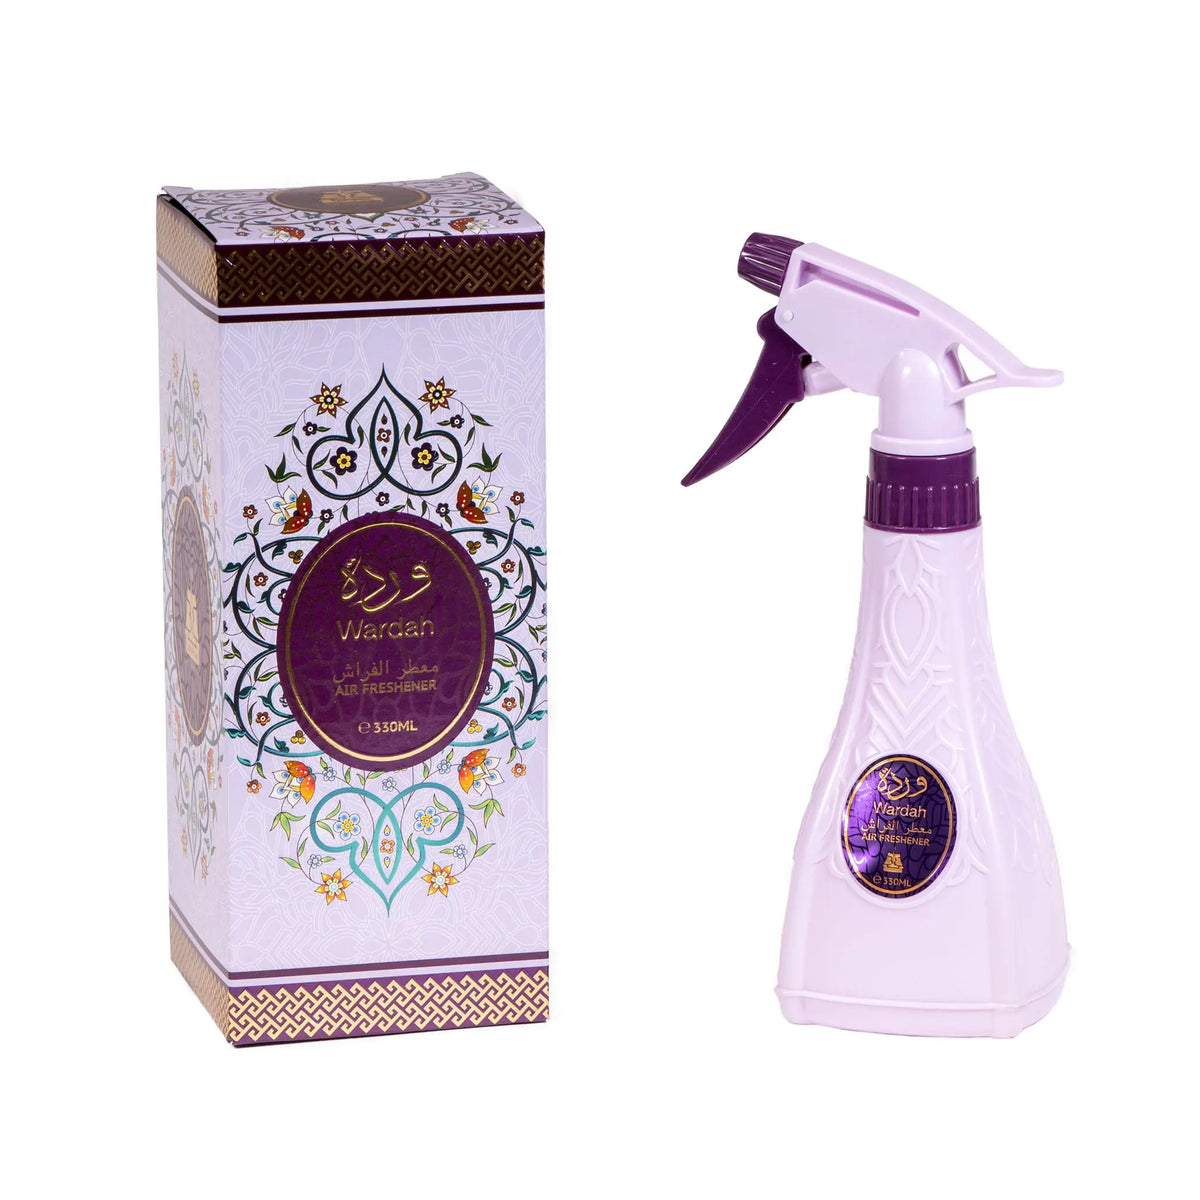 The image displays a product set that includes an air freshener spray bottle and its packaging box. The spray bottle is light purple with a darker purple spray trigger. It features a black label with gold and purple detailing, including Arabic script and the name "Wardah" in both Arabic and English. The packaging design incorporates traditional Middle Eastern motifs, and the entire set is displayed against a neutral backdrop, which allows the details and colors of the product to stand out.